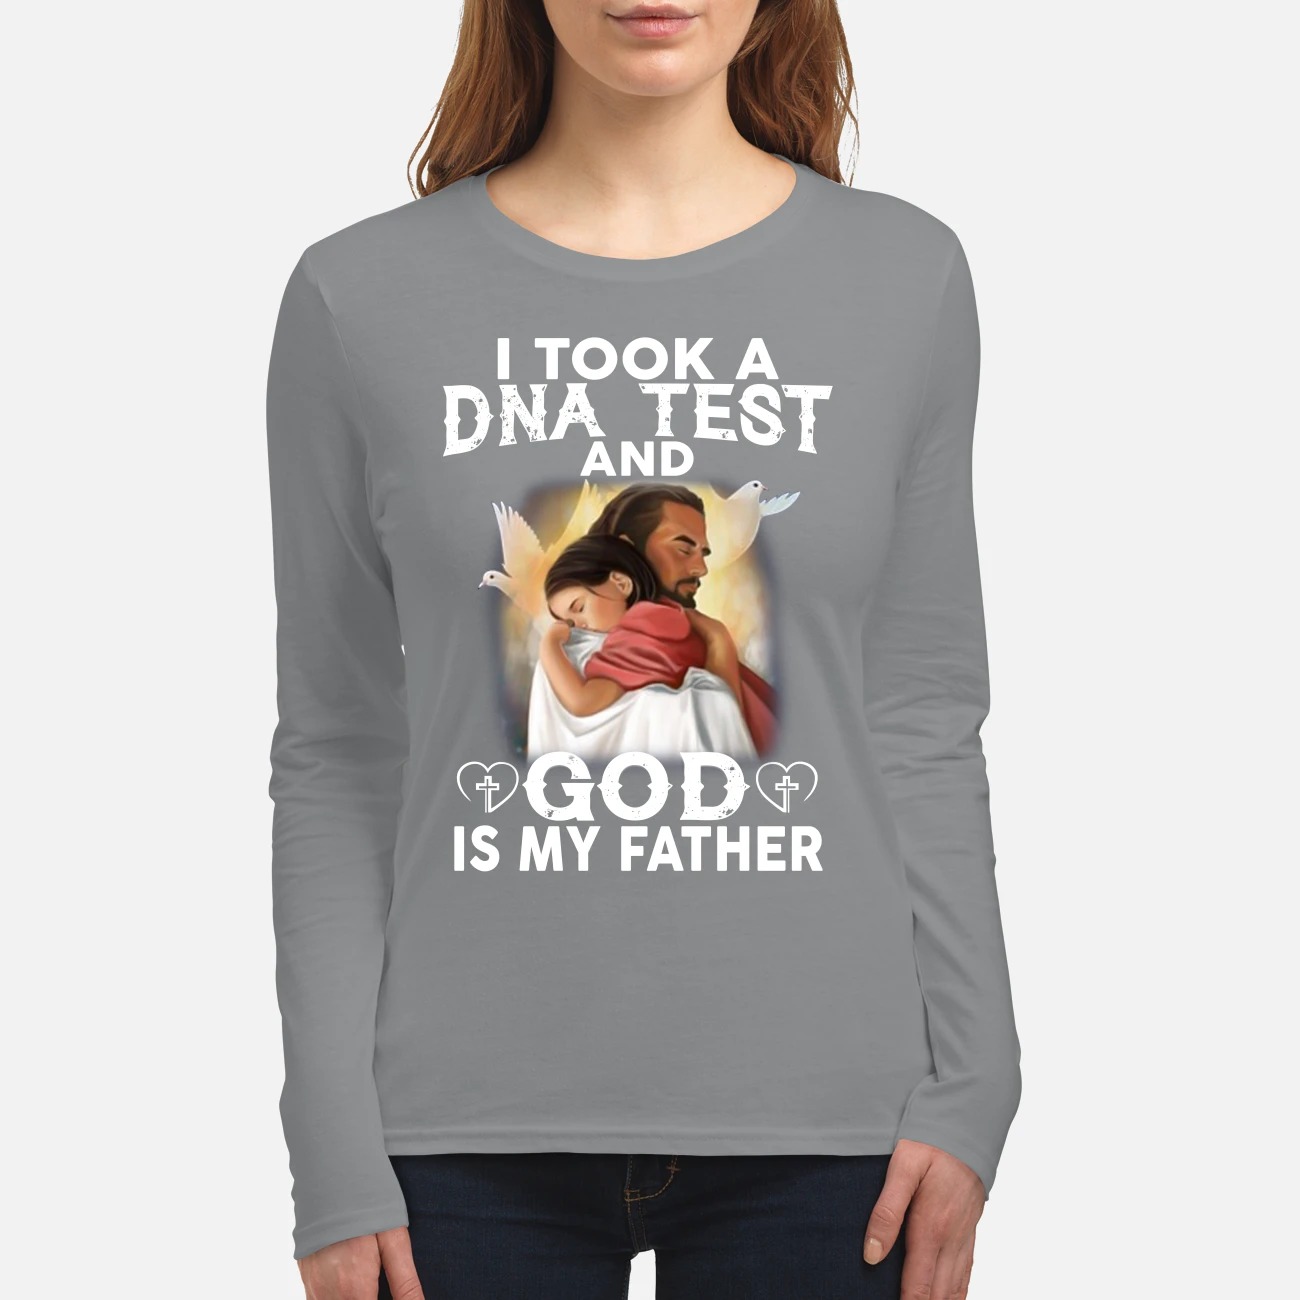 I took a DNA test and God is my father women's long sleeved shirt